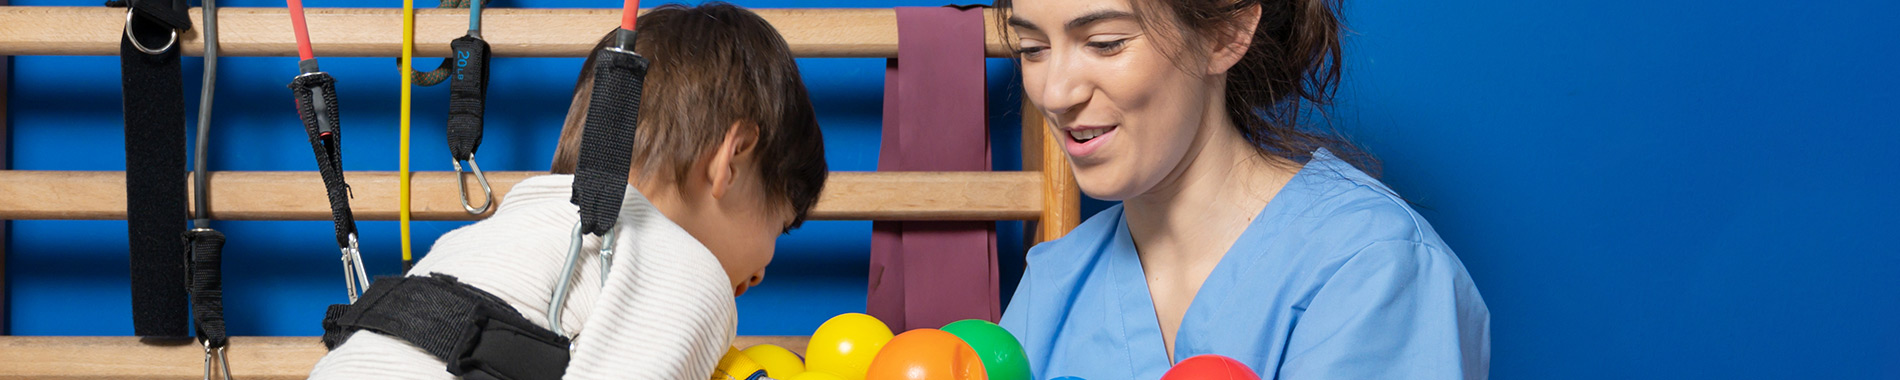 nurse and child playing with coloured balls